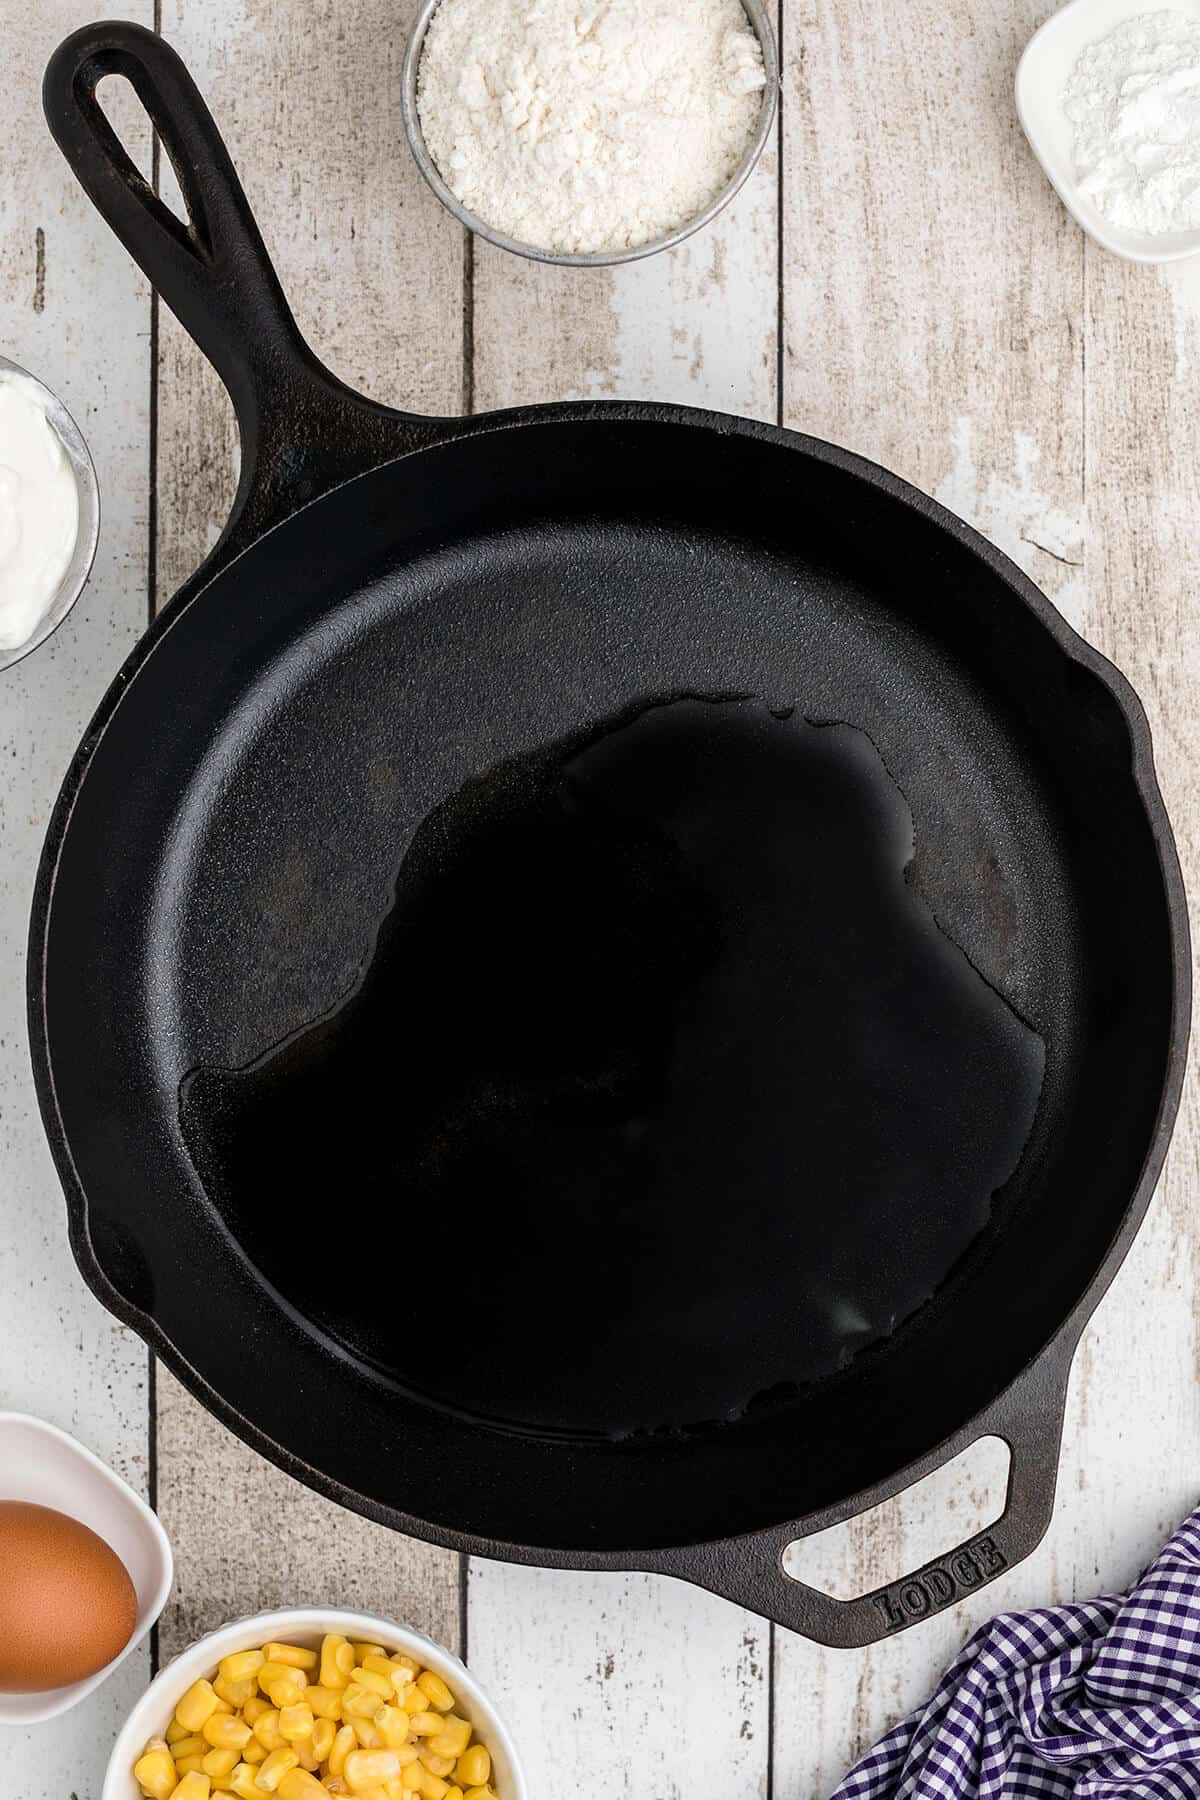 Cast iron skillet with oil in the bottom.